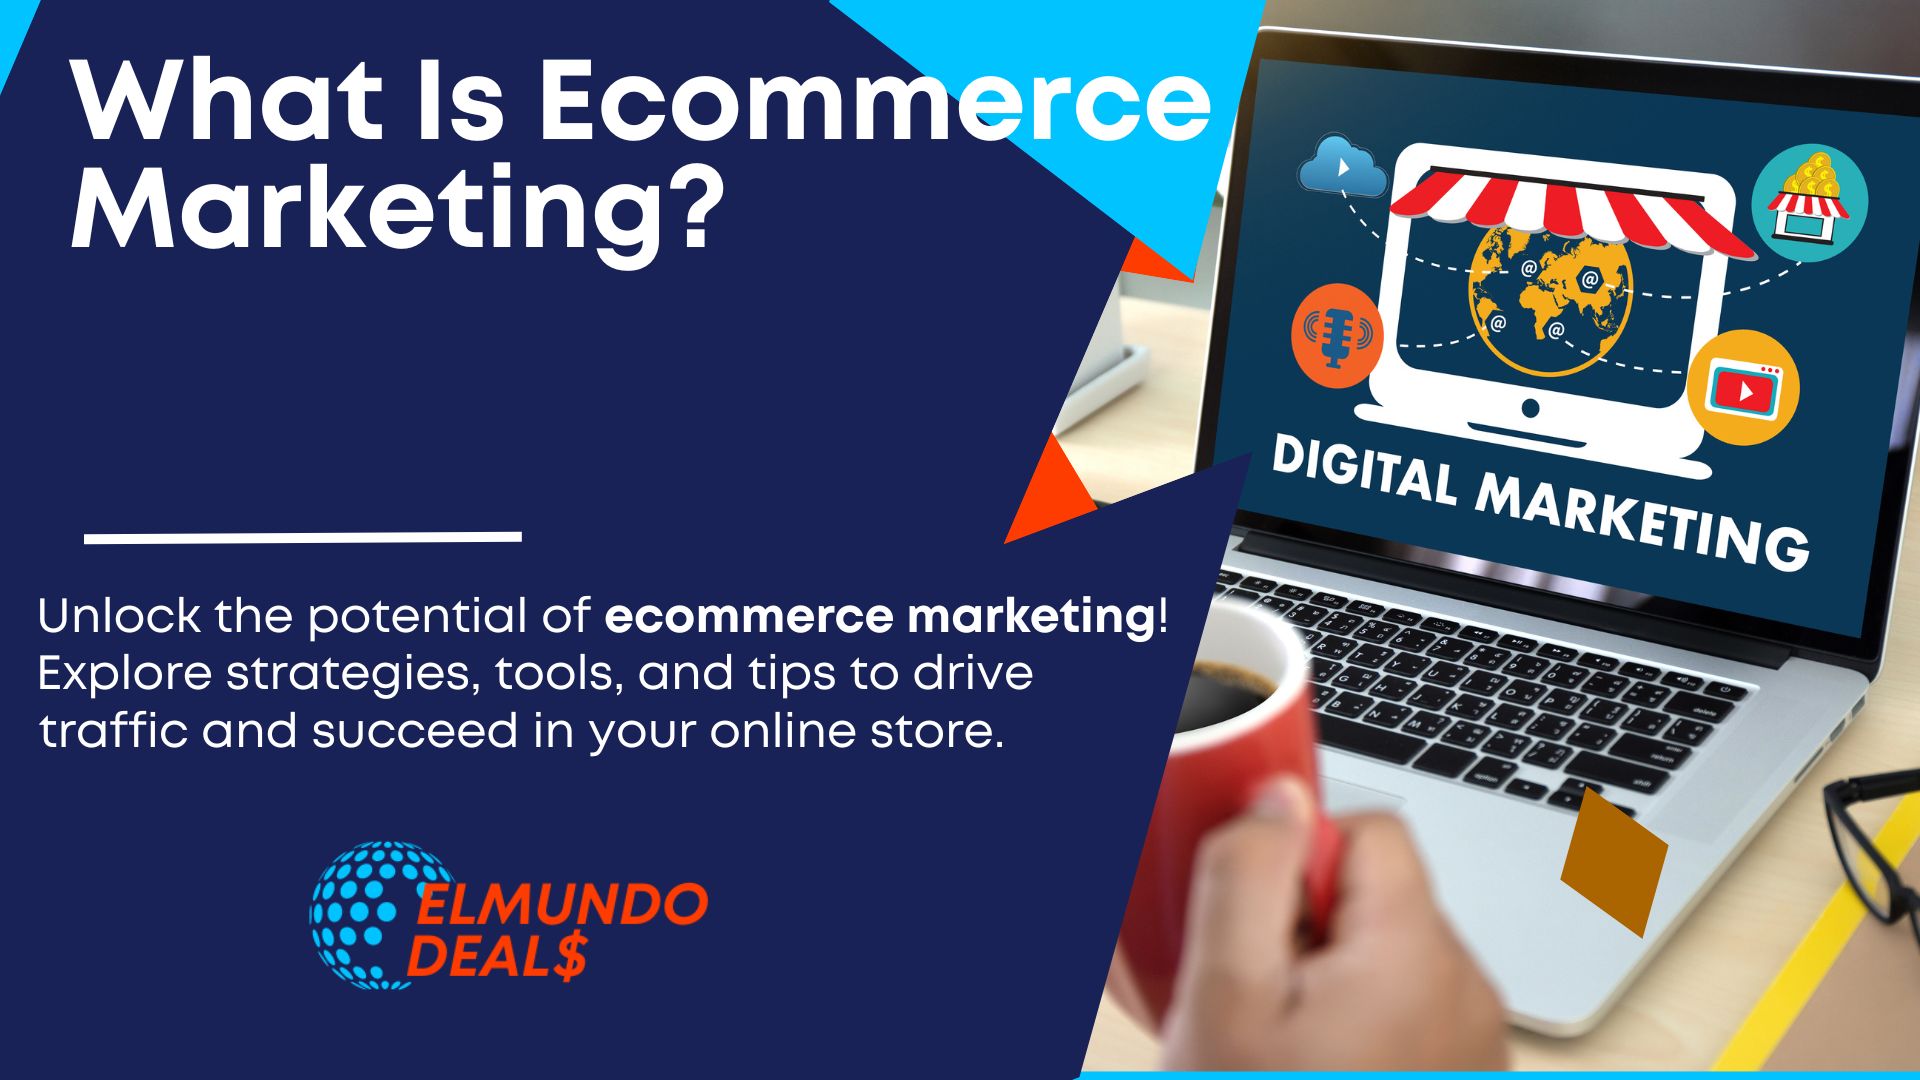 What Is Ecommerce Marketing? Strategies, Tools, Tips & More